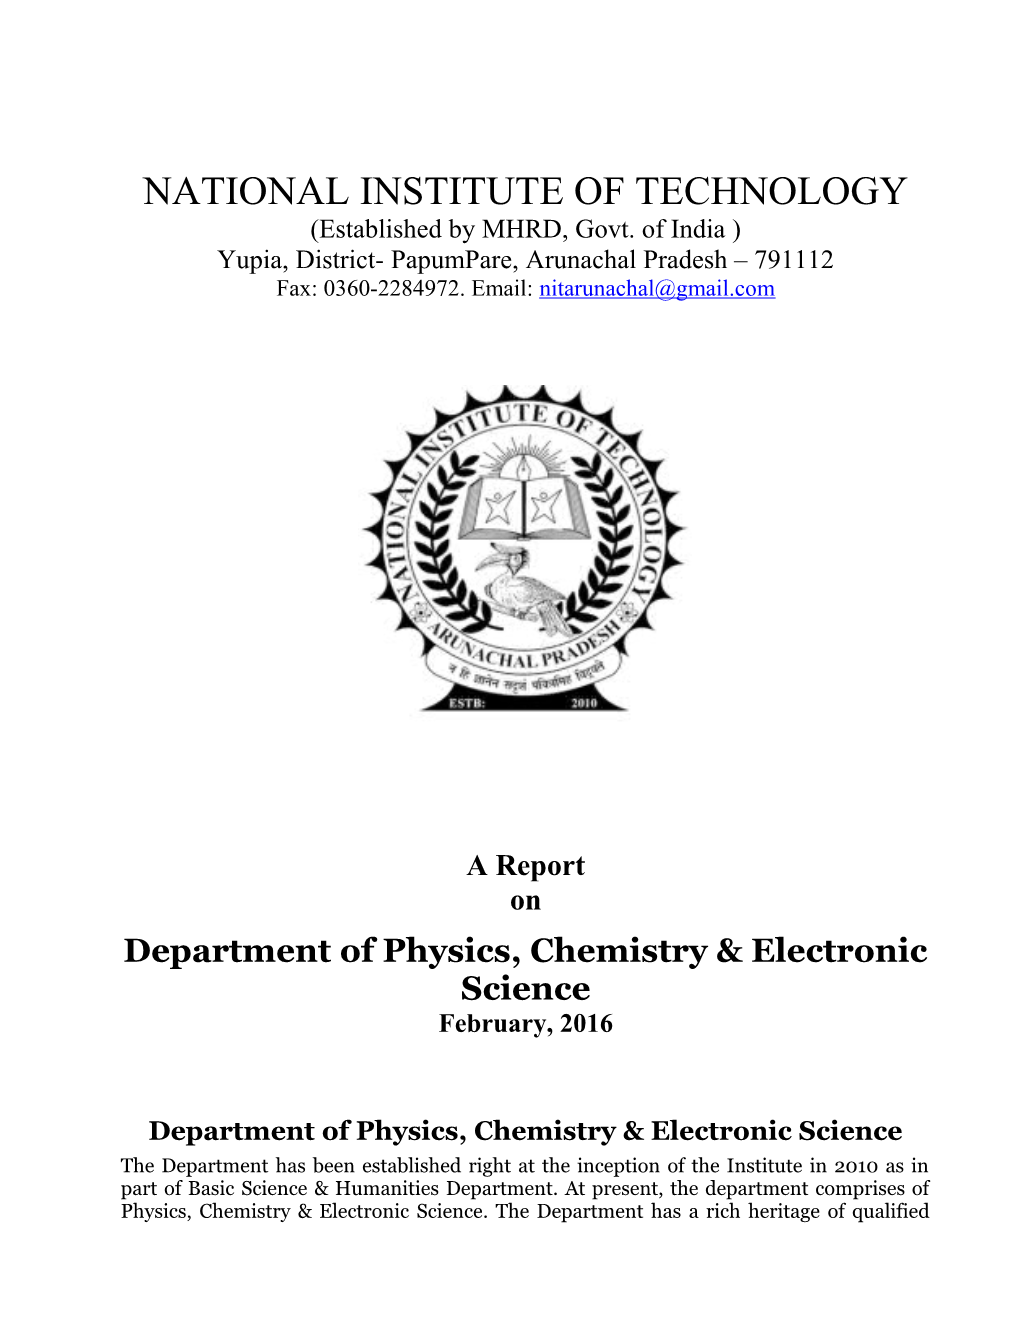 Department of Physics, Chemistry & Electronic Science